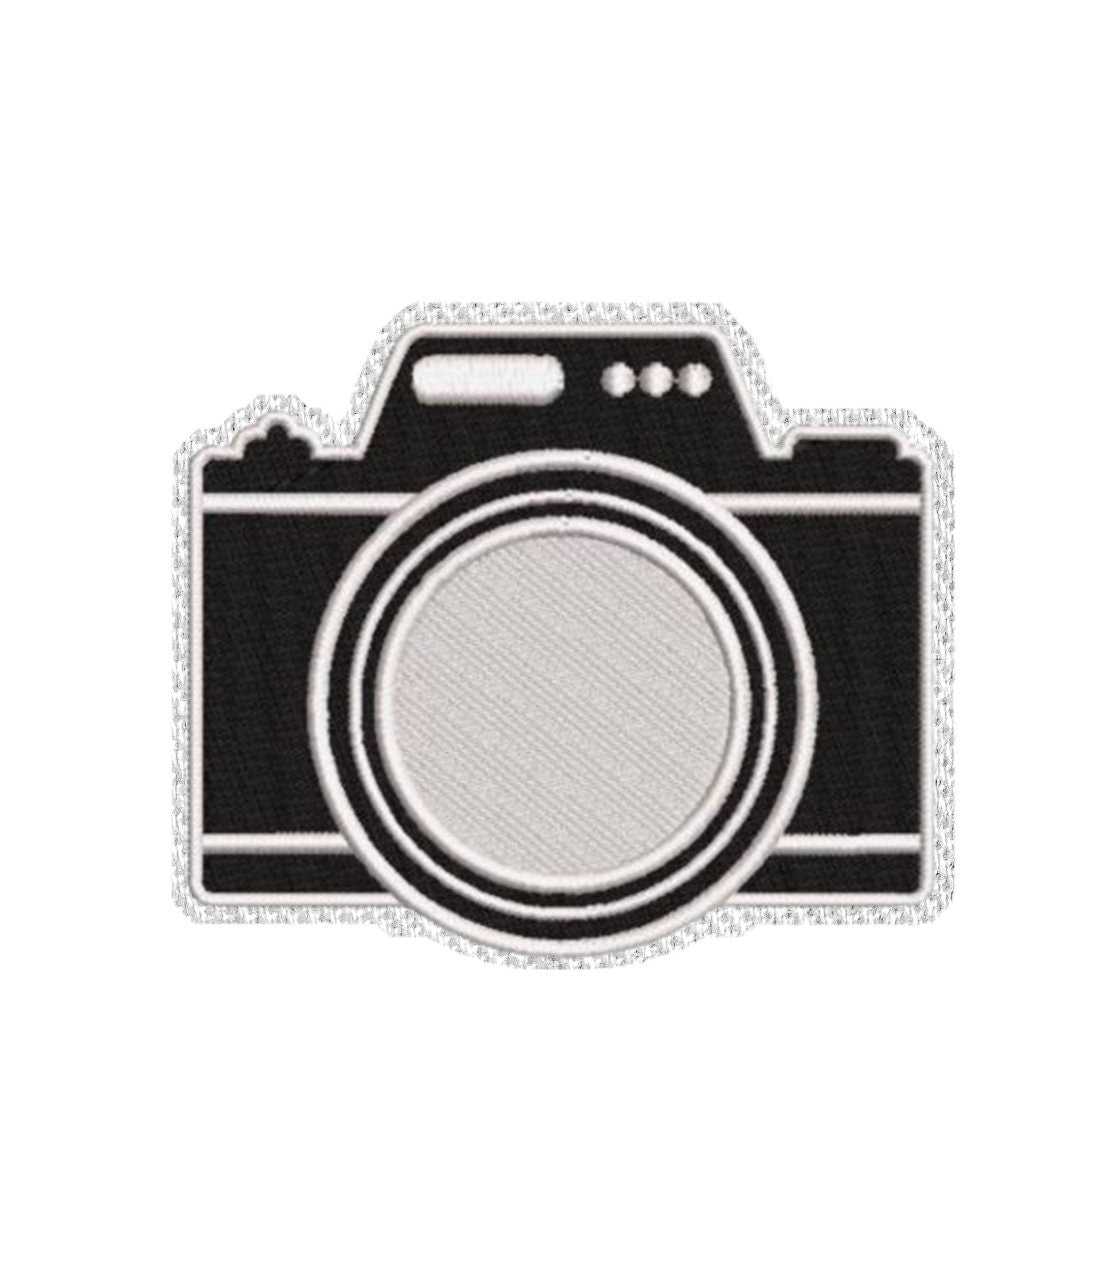 Black and White Camera Iron on Patch / Sew on embroidered  patches Travel & Season Embroidery Women Applique Merit Badge for Clothing Jacket